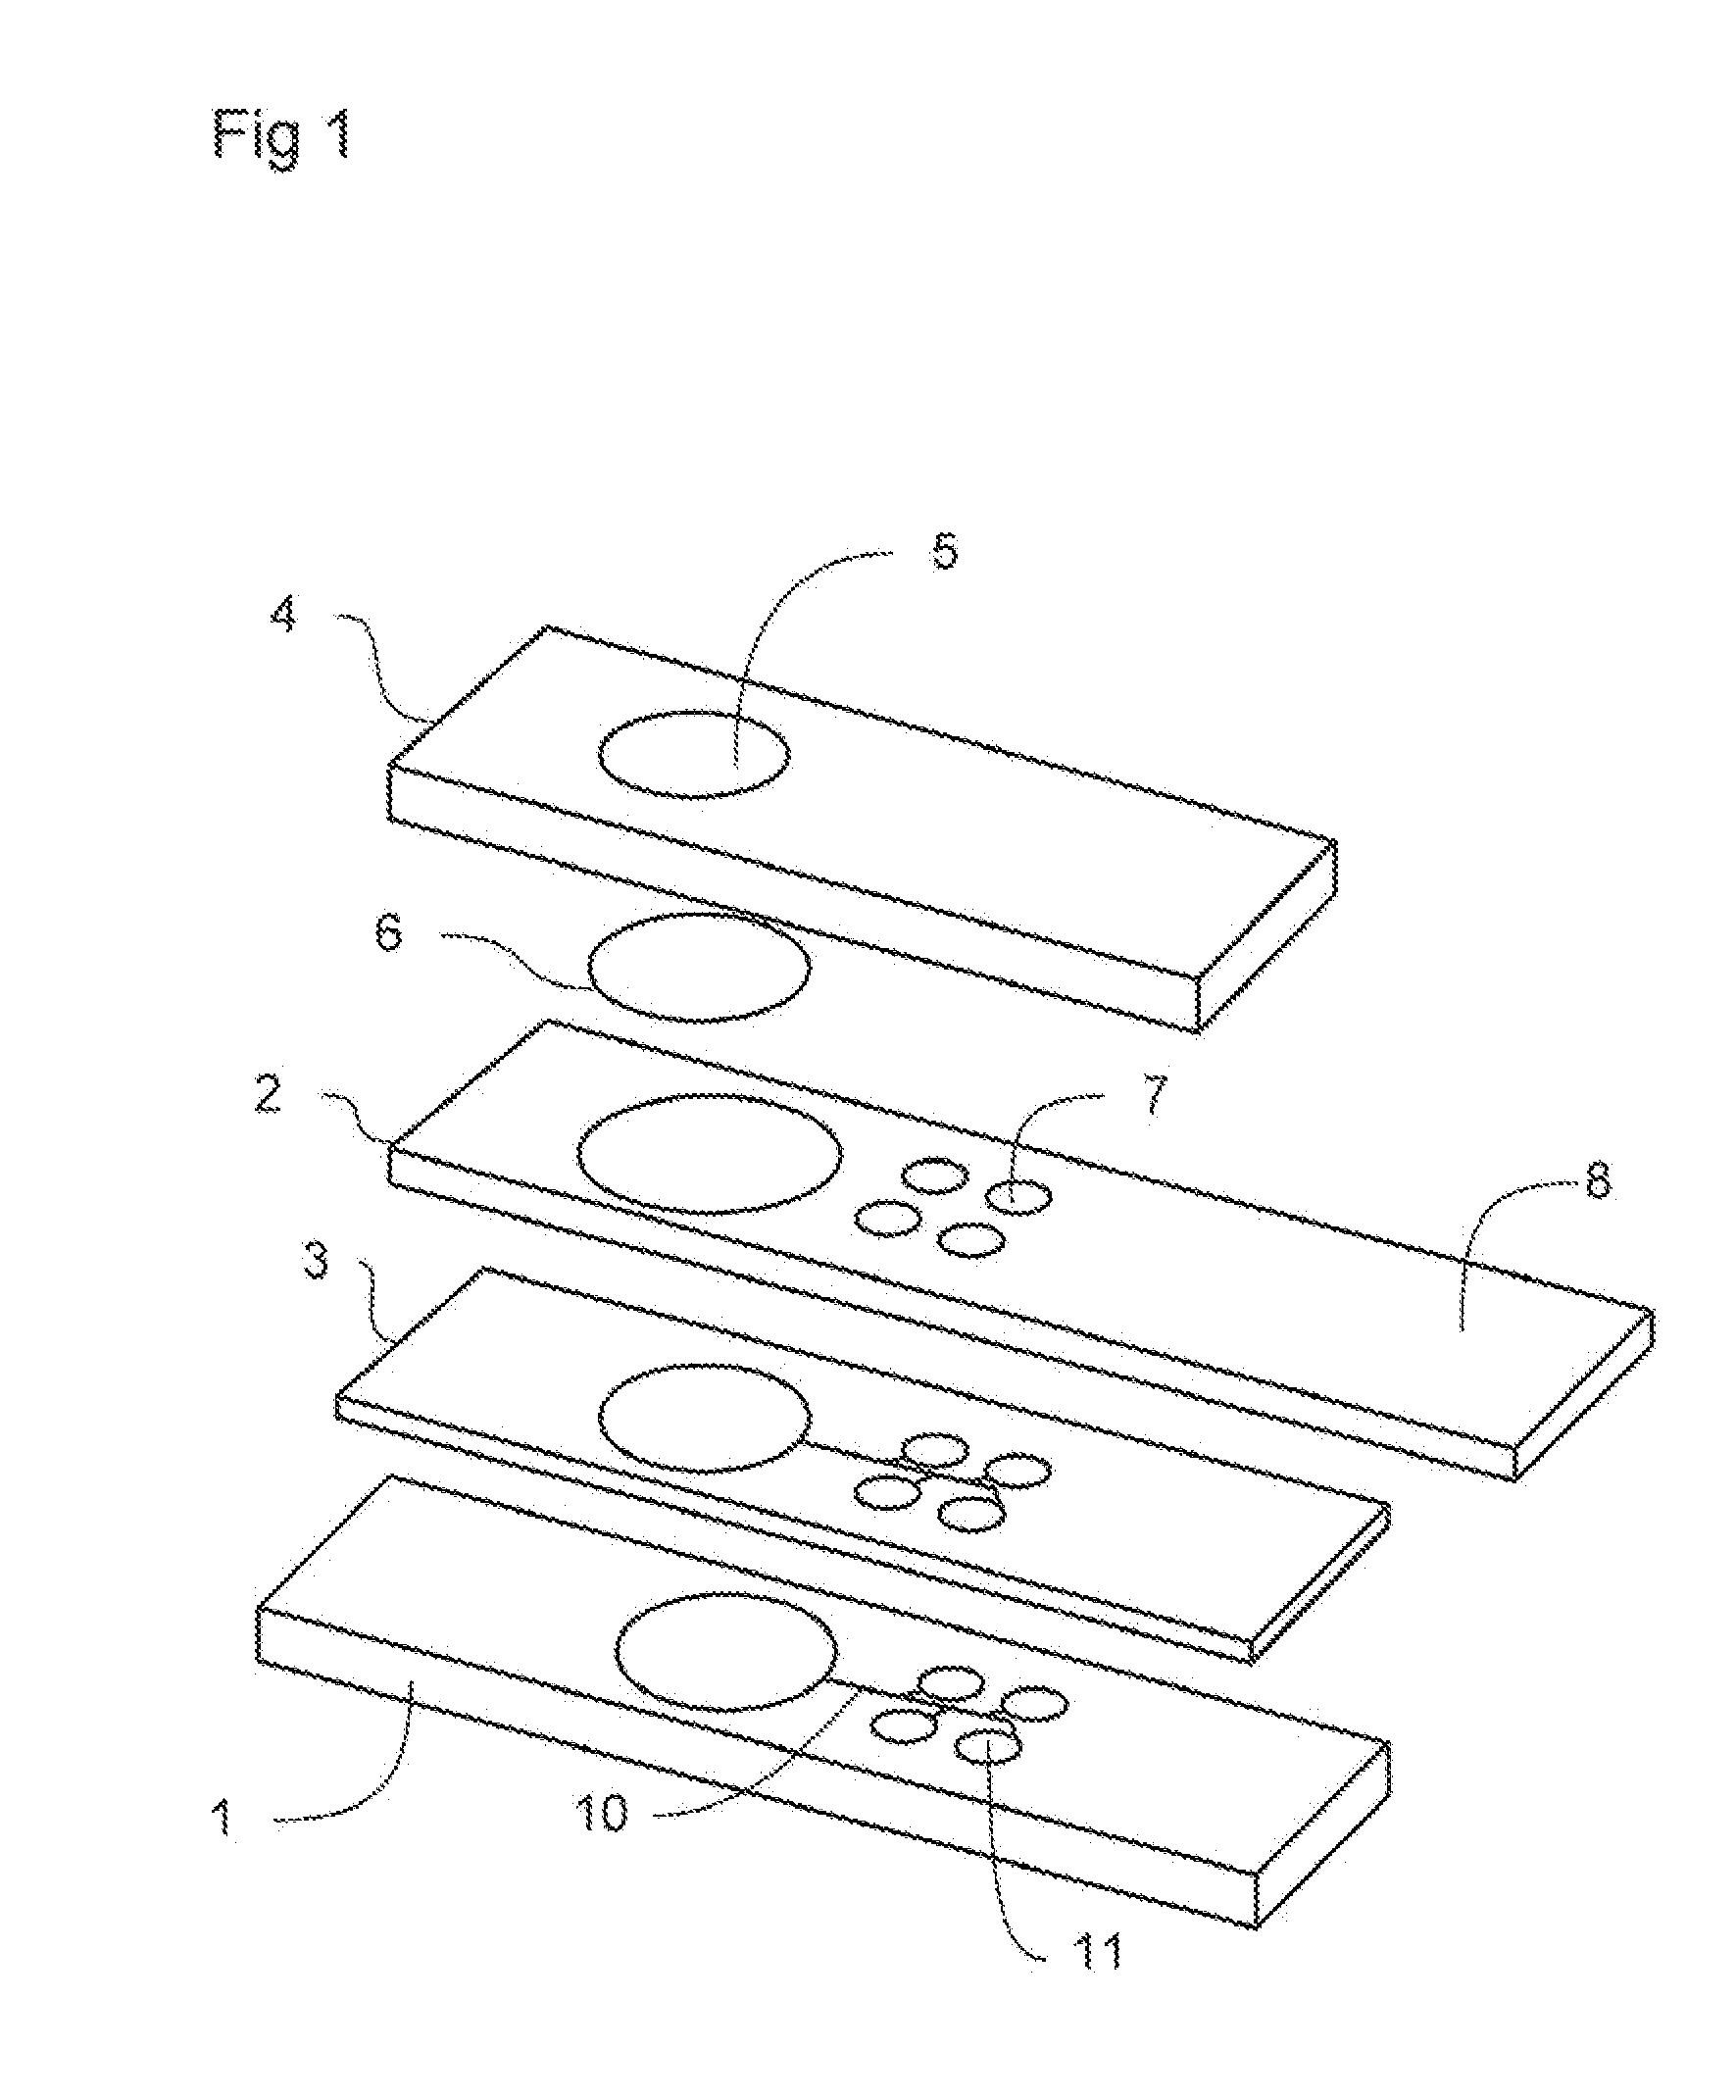 Channel for capillary flow, biosensor device and method for forming an object having a channel for capillary flow